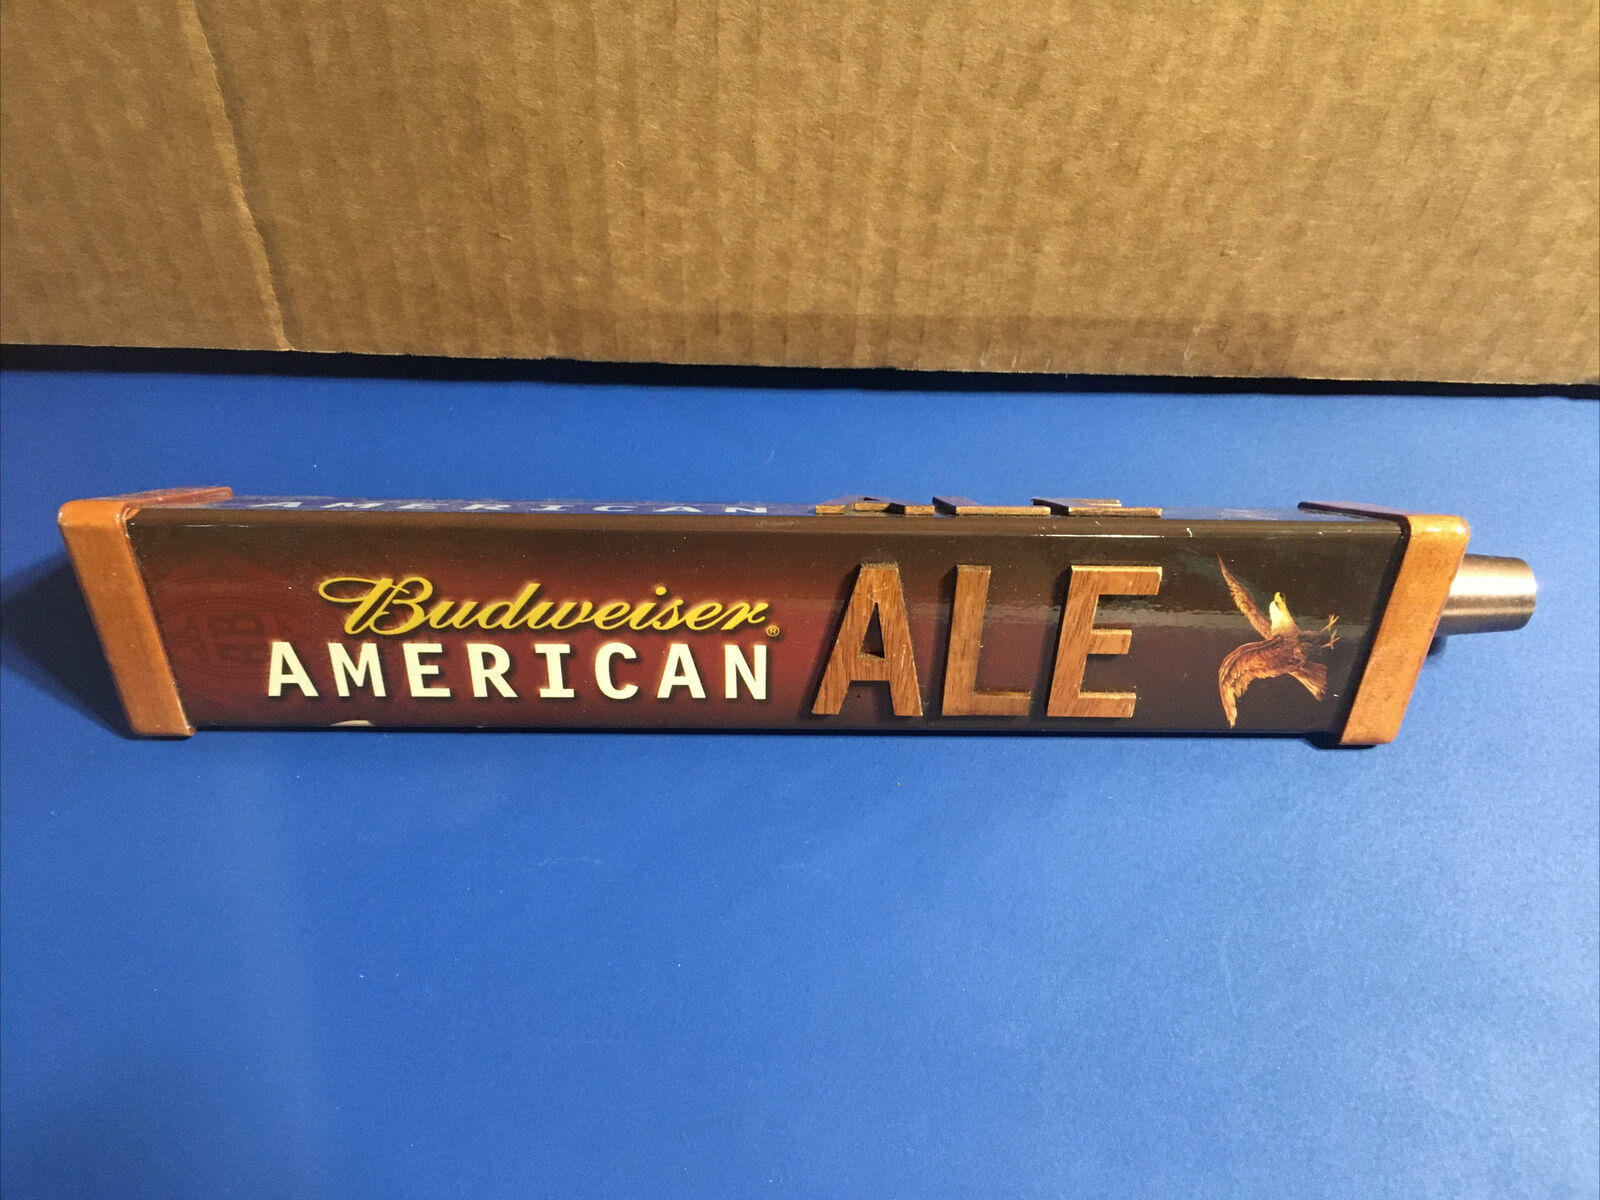 Primary image for Budweiser American Ale Beer Tap Handle